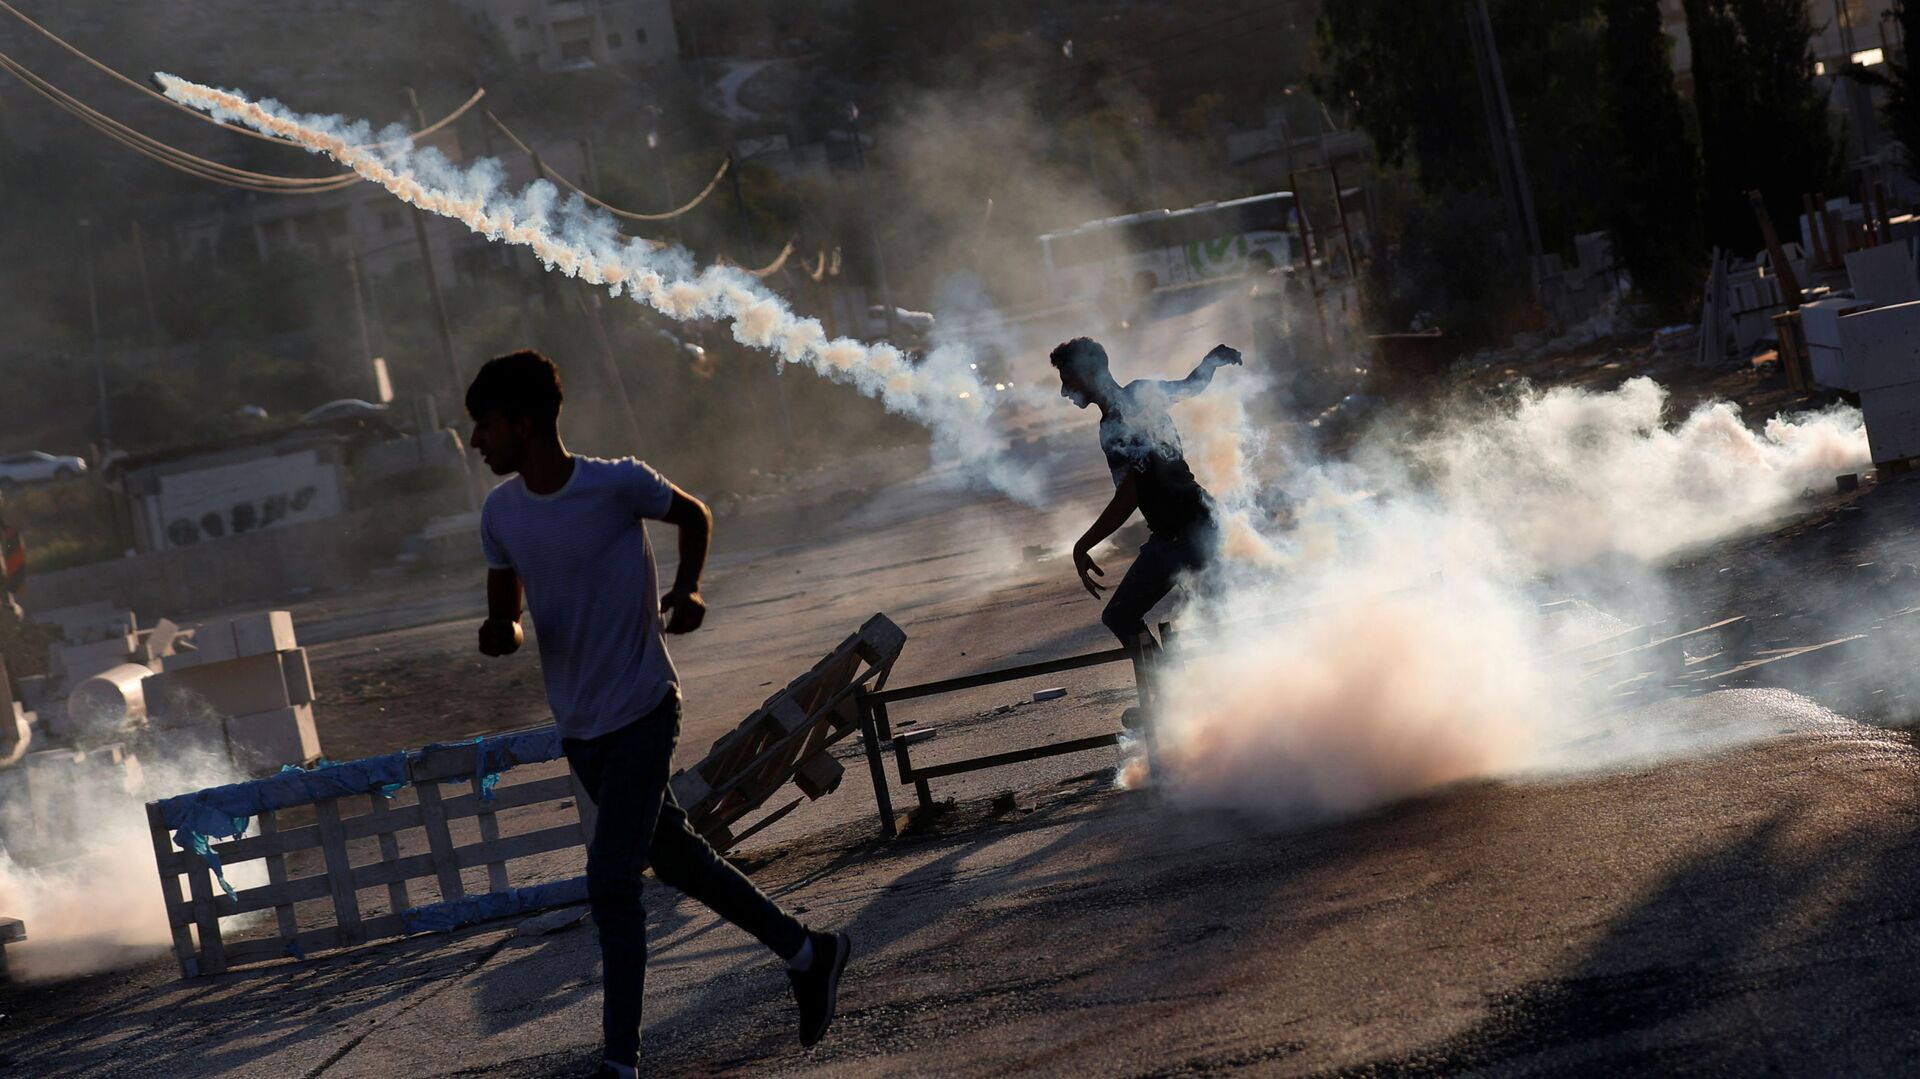 Palestinian protester throws back a tear gas grenade during a protest over the killing of a Palestinian man by Israeli soldiers, according to health ministry, in Beita in the Israeli-occupied West Bank July 28, 2021 - Sputnik International, 1920, 12.11.2021